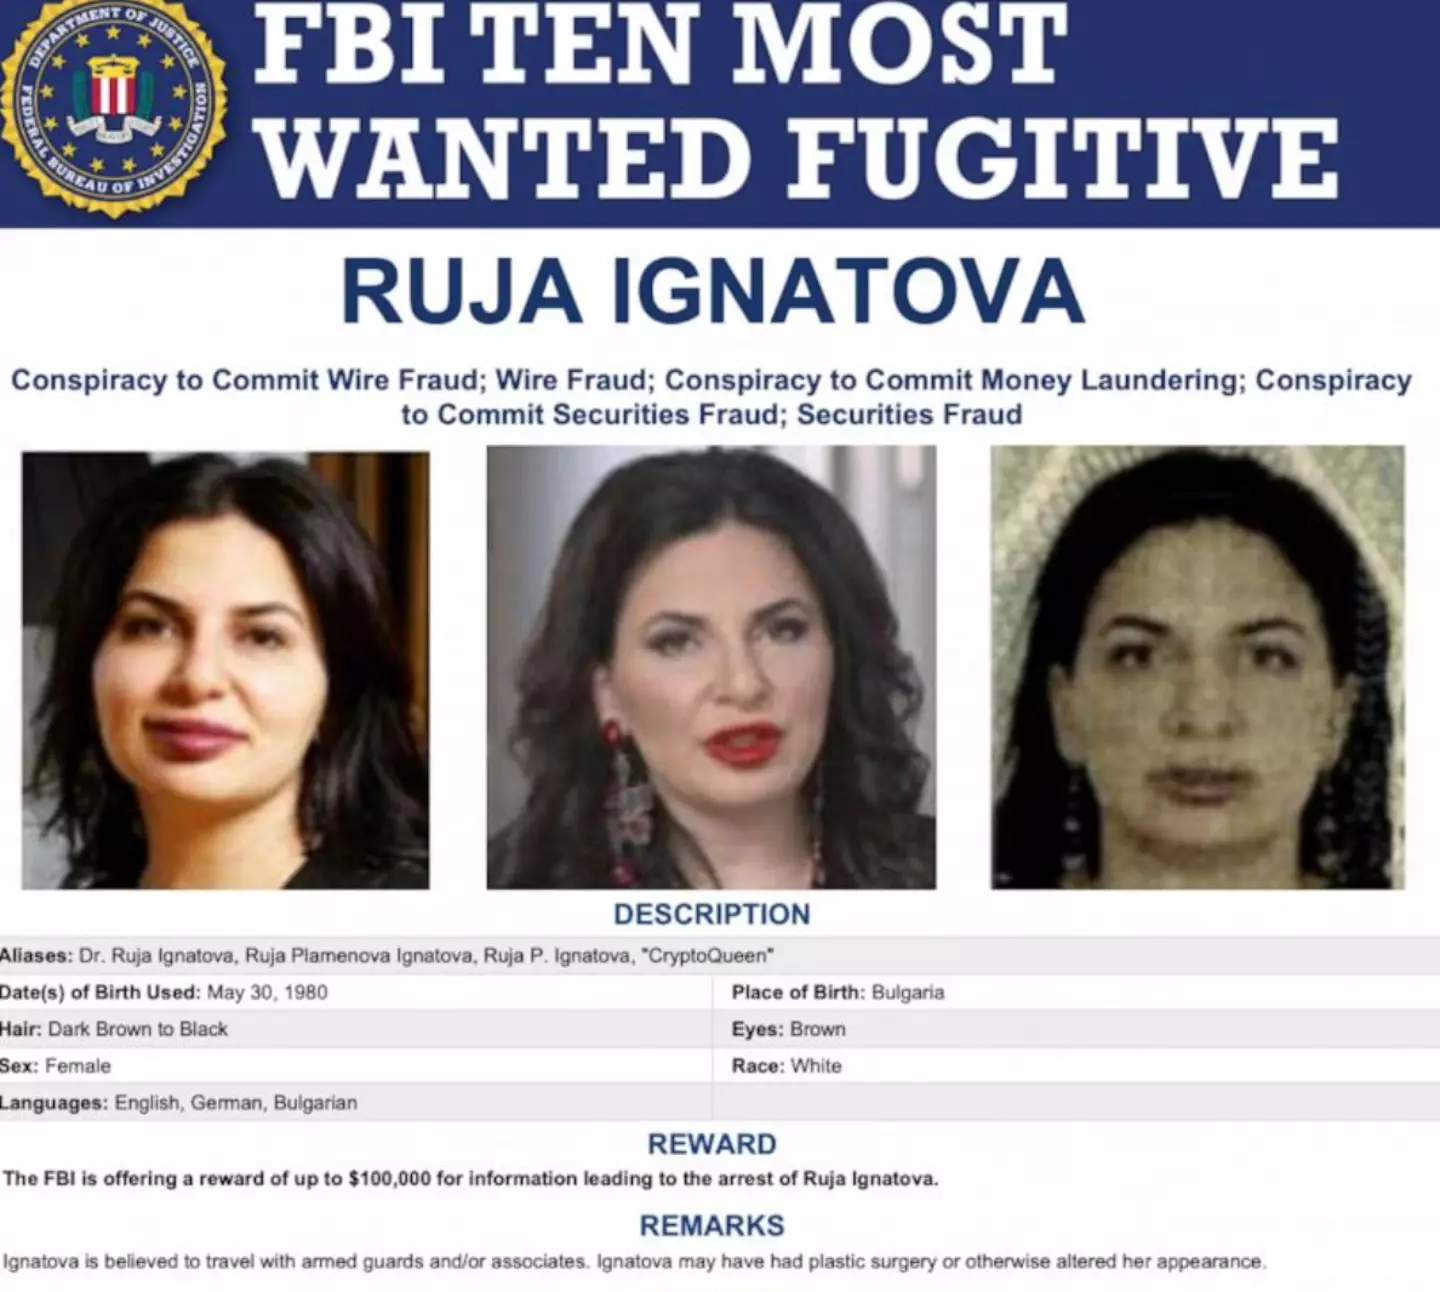 Ruja Ignatova, dubbed the ‘Cryptoqueen’, has been named a most-wanted fugitive by the FBI.